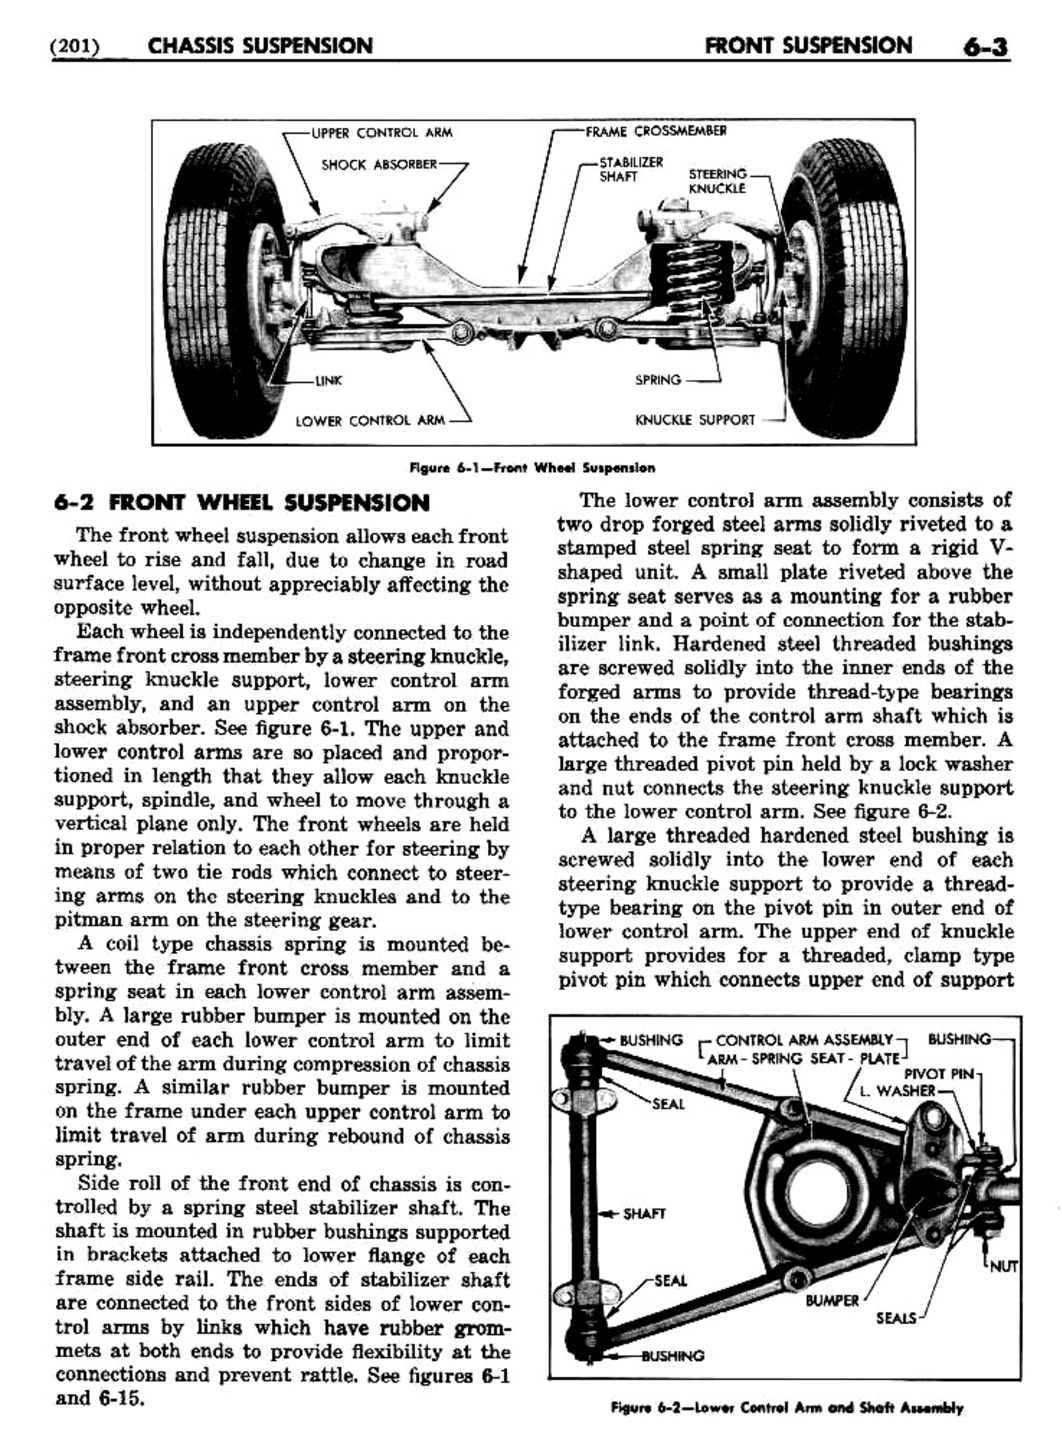 n_07 1948 Buick Shop Manual - Chassis Suspension-003-003.jpg